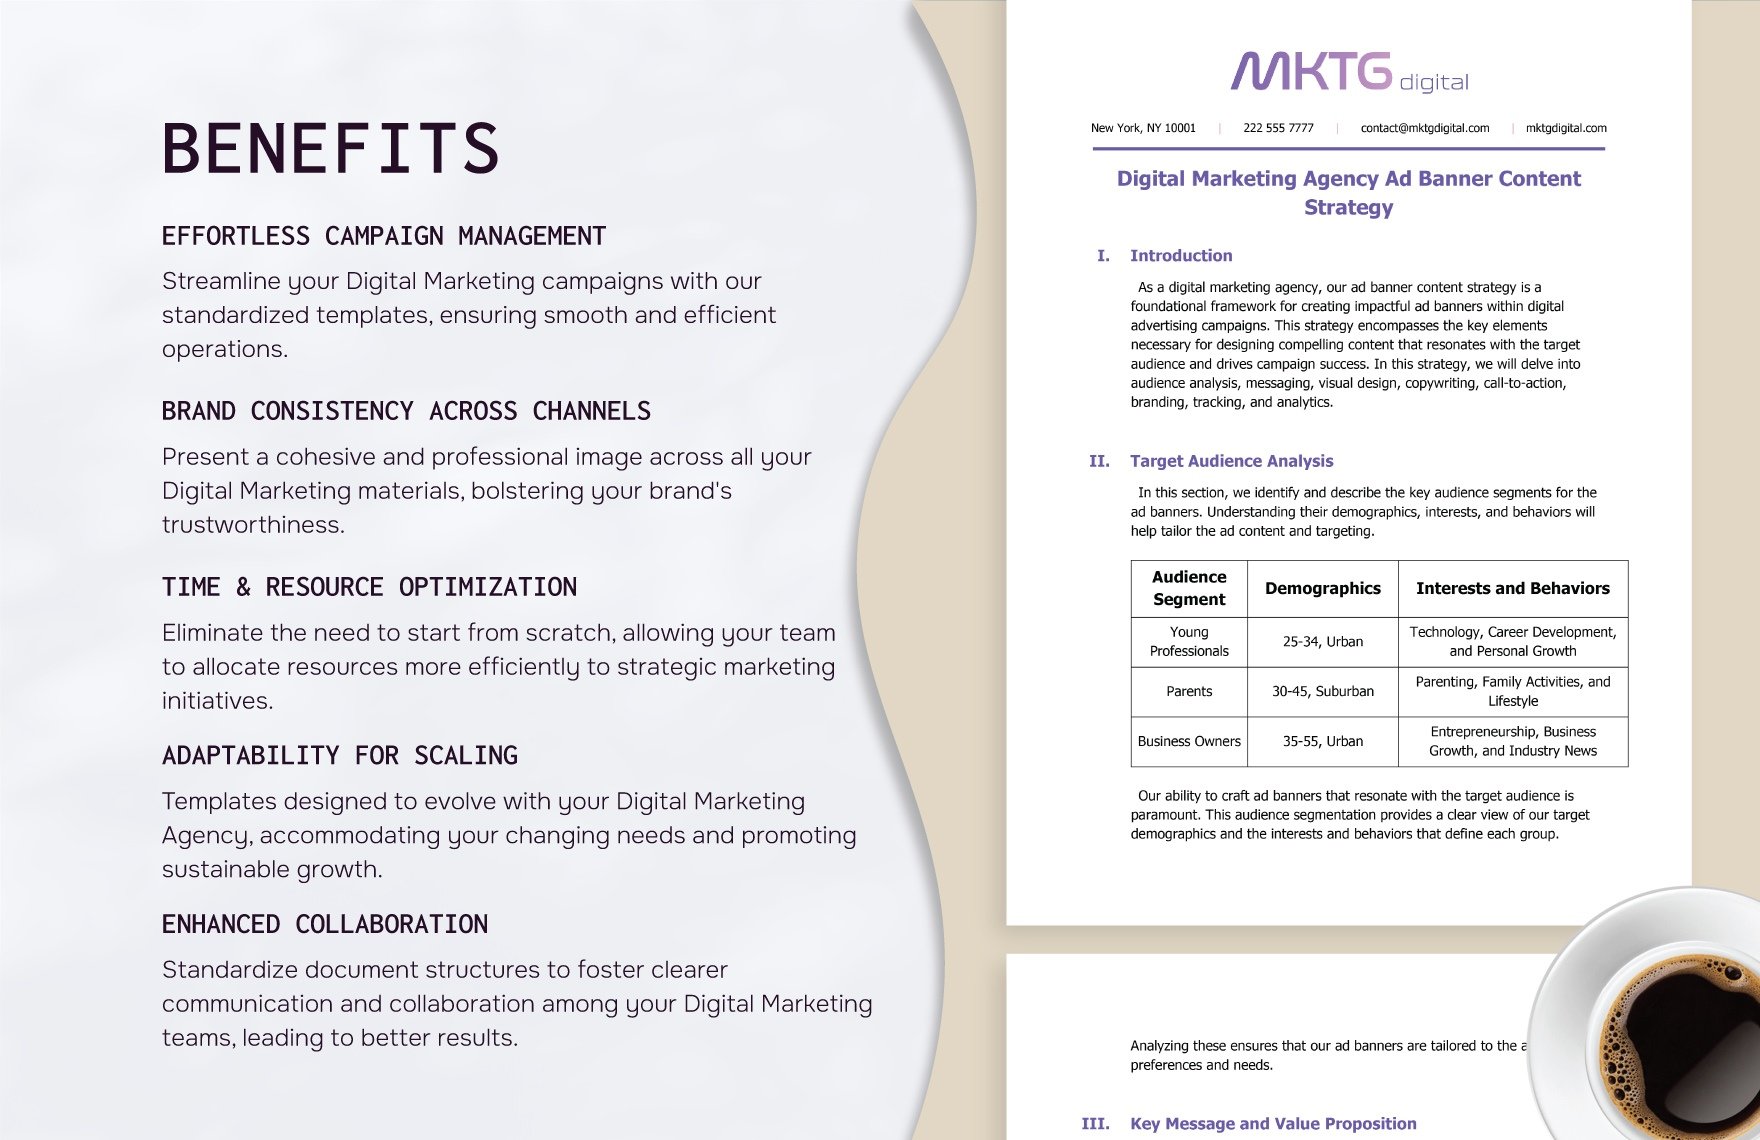 Digital Marketing Agency Ad Banner Content Strategy Template